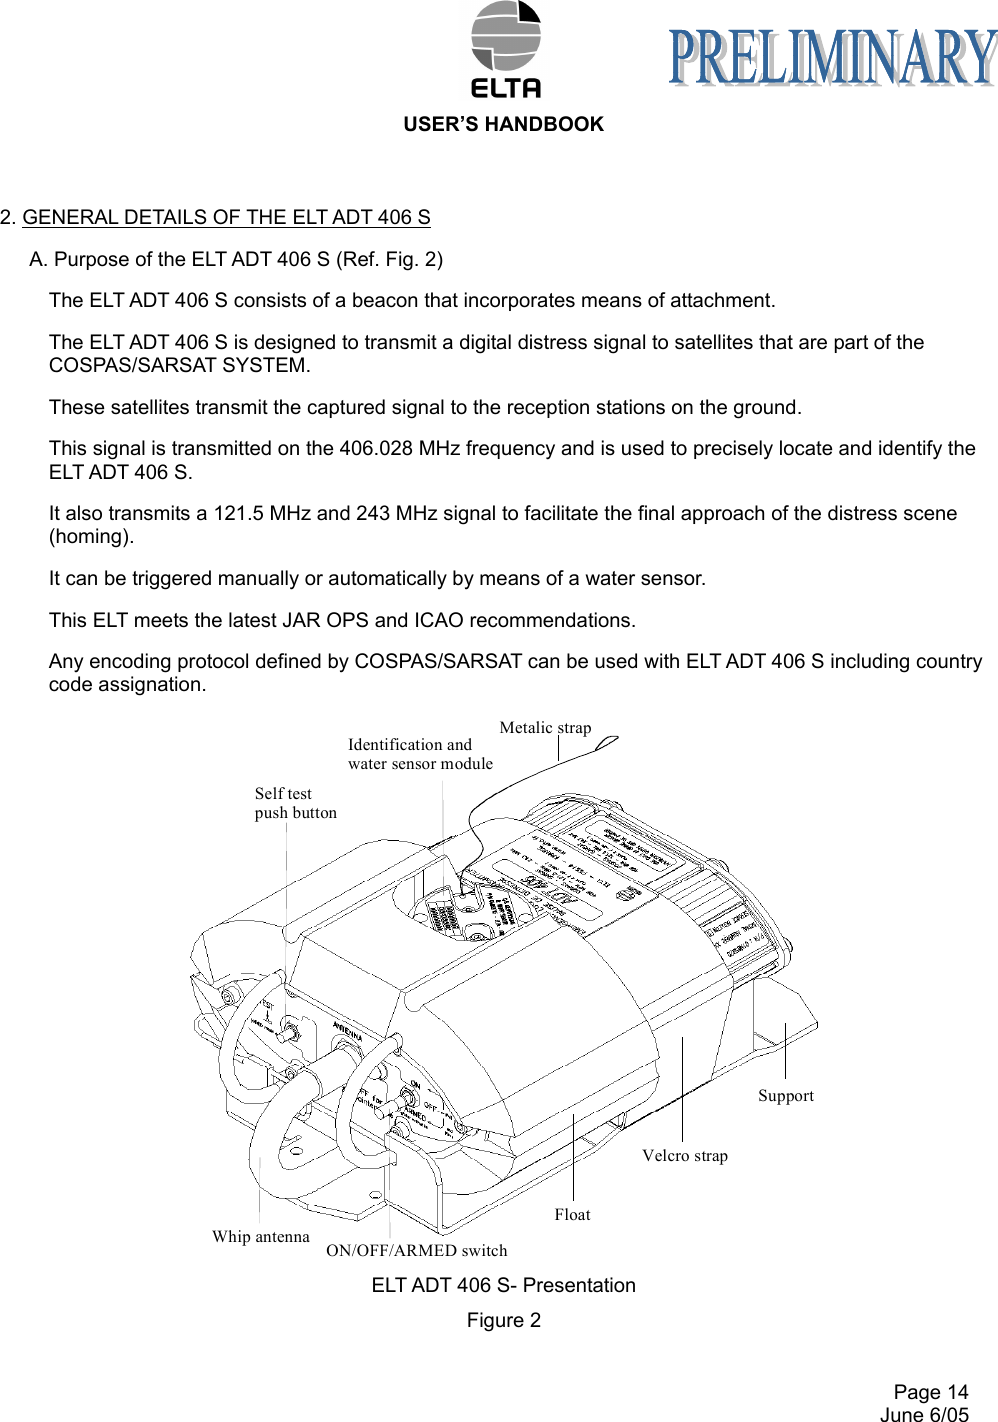  USER’S HANDBOOK     Page 14   June 6/05 2. GENERAL DETAILS OF THE ELT ADT 406 S A. Purpose of the ELT ADT 406 S (Ref. Fig. 2) The ELT ADT 406 S consists of a beacon that incorporates means of attachment. The ELT ADT 406 S is designed to transmit a digital distress signal to satellites that are part of the COSPAS/SARSAT SYSTEM. These satellites transmit the captured signal to the reception stations on the ground. This signal is transmitted on the 406.028 MHz frequency and is used to precisely locate and identify the ELT ADT 406 S. It also transmits a 121.5 MHz and 243 MHz signal to facilitate the final approach of the distress scene (homing). It can be triggered manually or automatically by means of a water sensor. This ELT meets the latest JAR OPS and ICAO recommendations. Any encoding protocol defined by COSPAS/SARSAT can be used with ELT ADT 406 S including country code assignation. ELT ADT 406 S- Presentation Figure 2  Whip antennaSupportFloatMetalic strapIdentification andwater sensor moduleSelf test push buttonVelcro strapON/OFF/ARMED switch